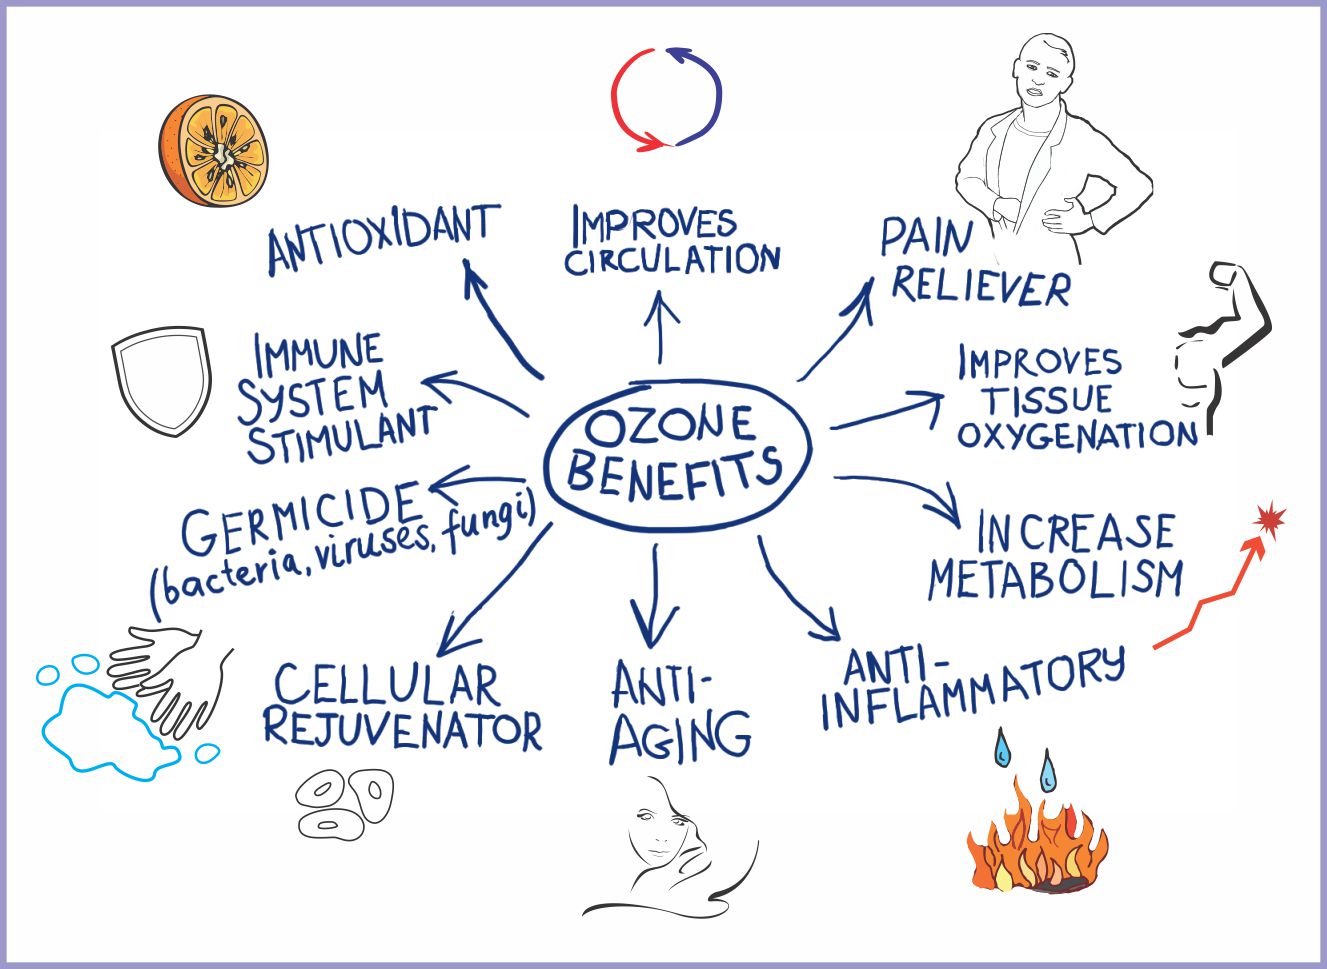 Ozone benefits picture for email